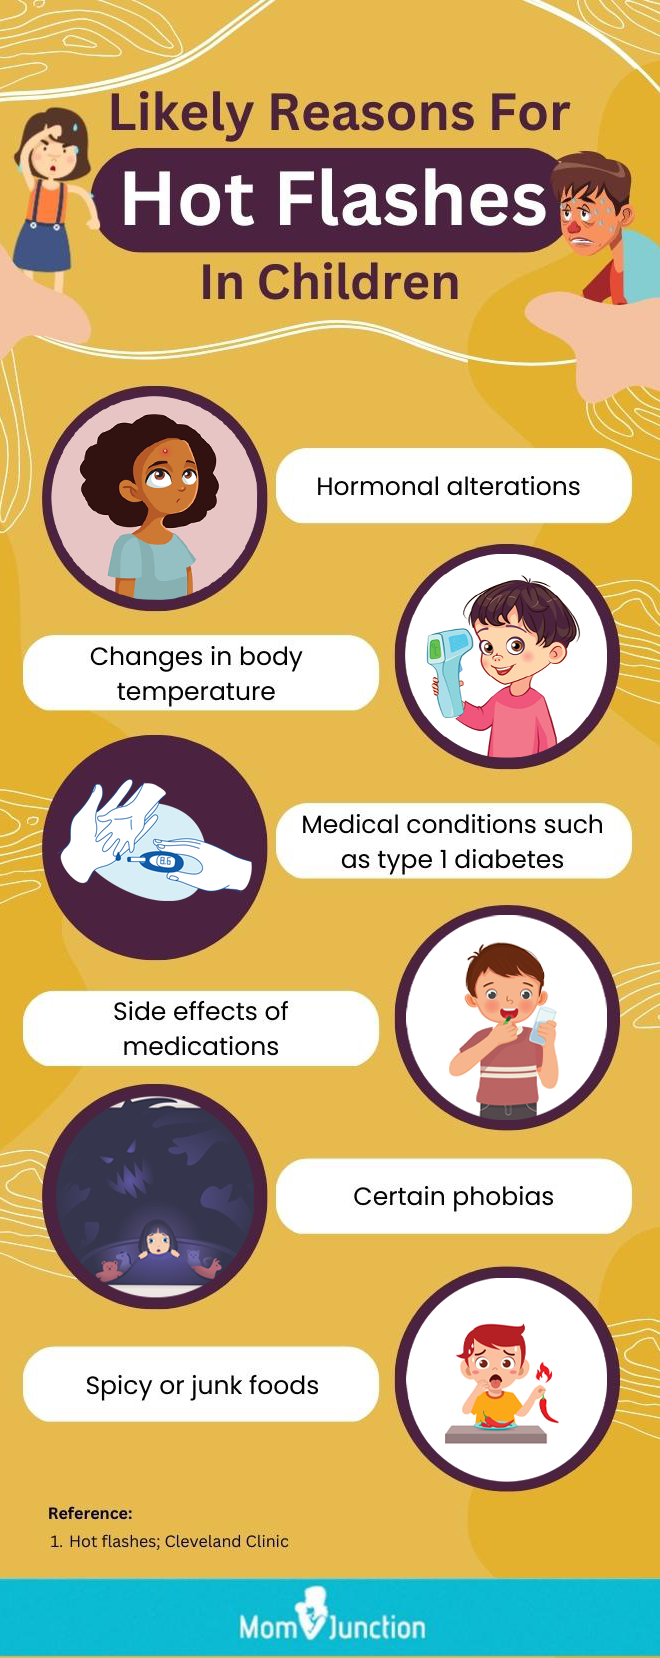 likely reasons for hot flashes in children (infographic)